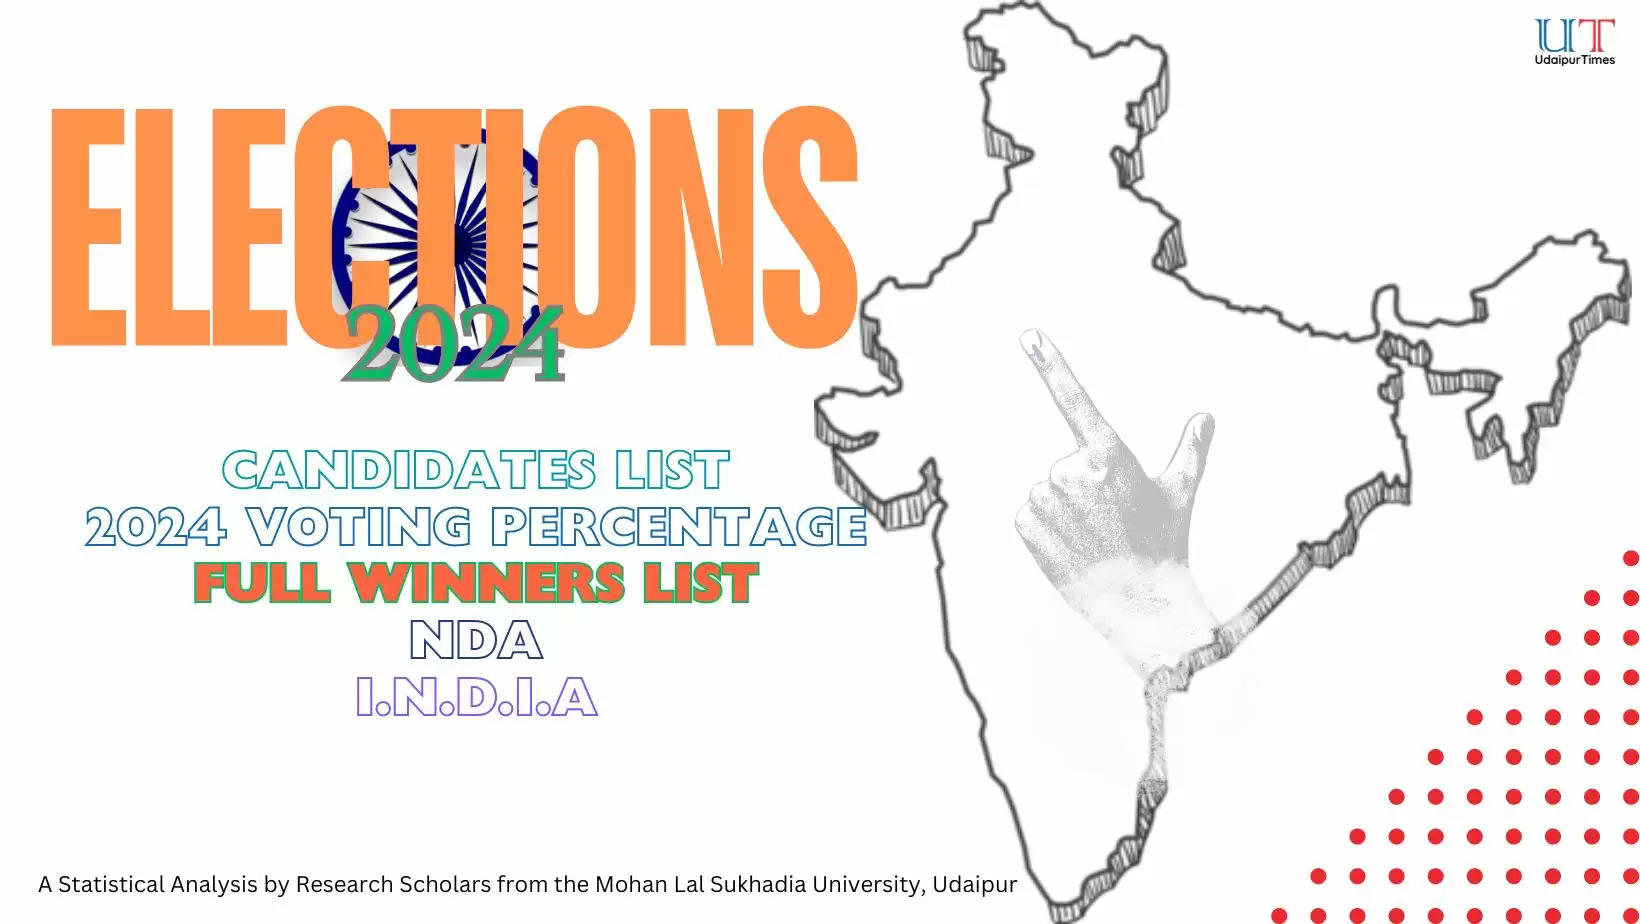 Lok Sabha 2024 Check the Constituency wise Candidates, Voter Percentage for 2024 and Final Confirmed Winners List Here